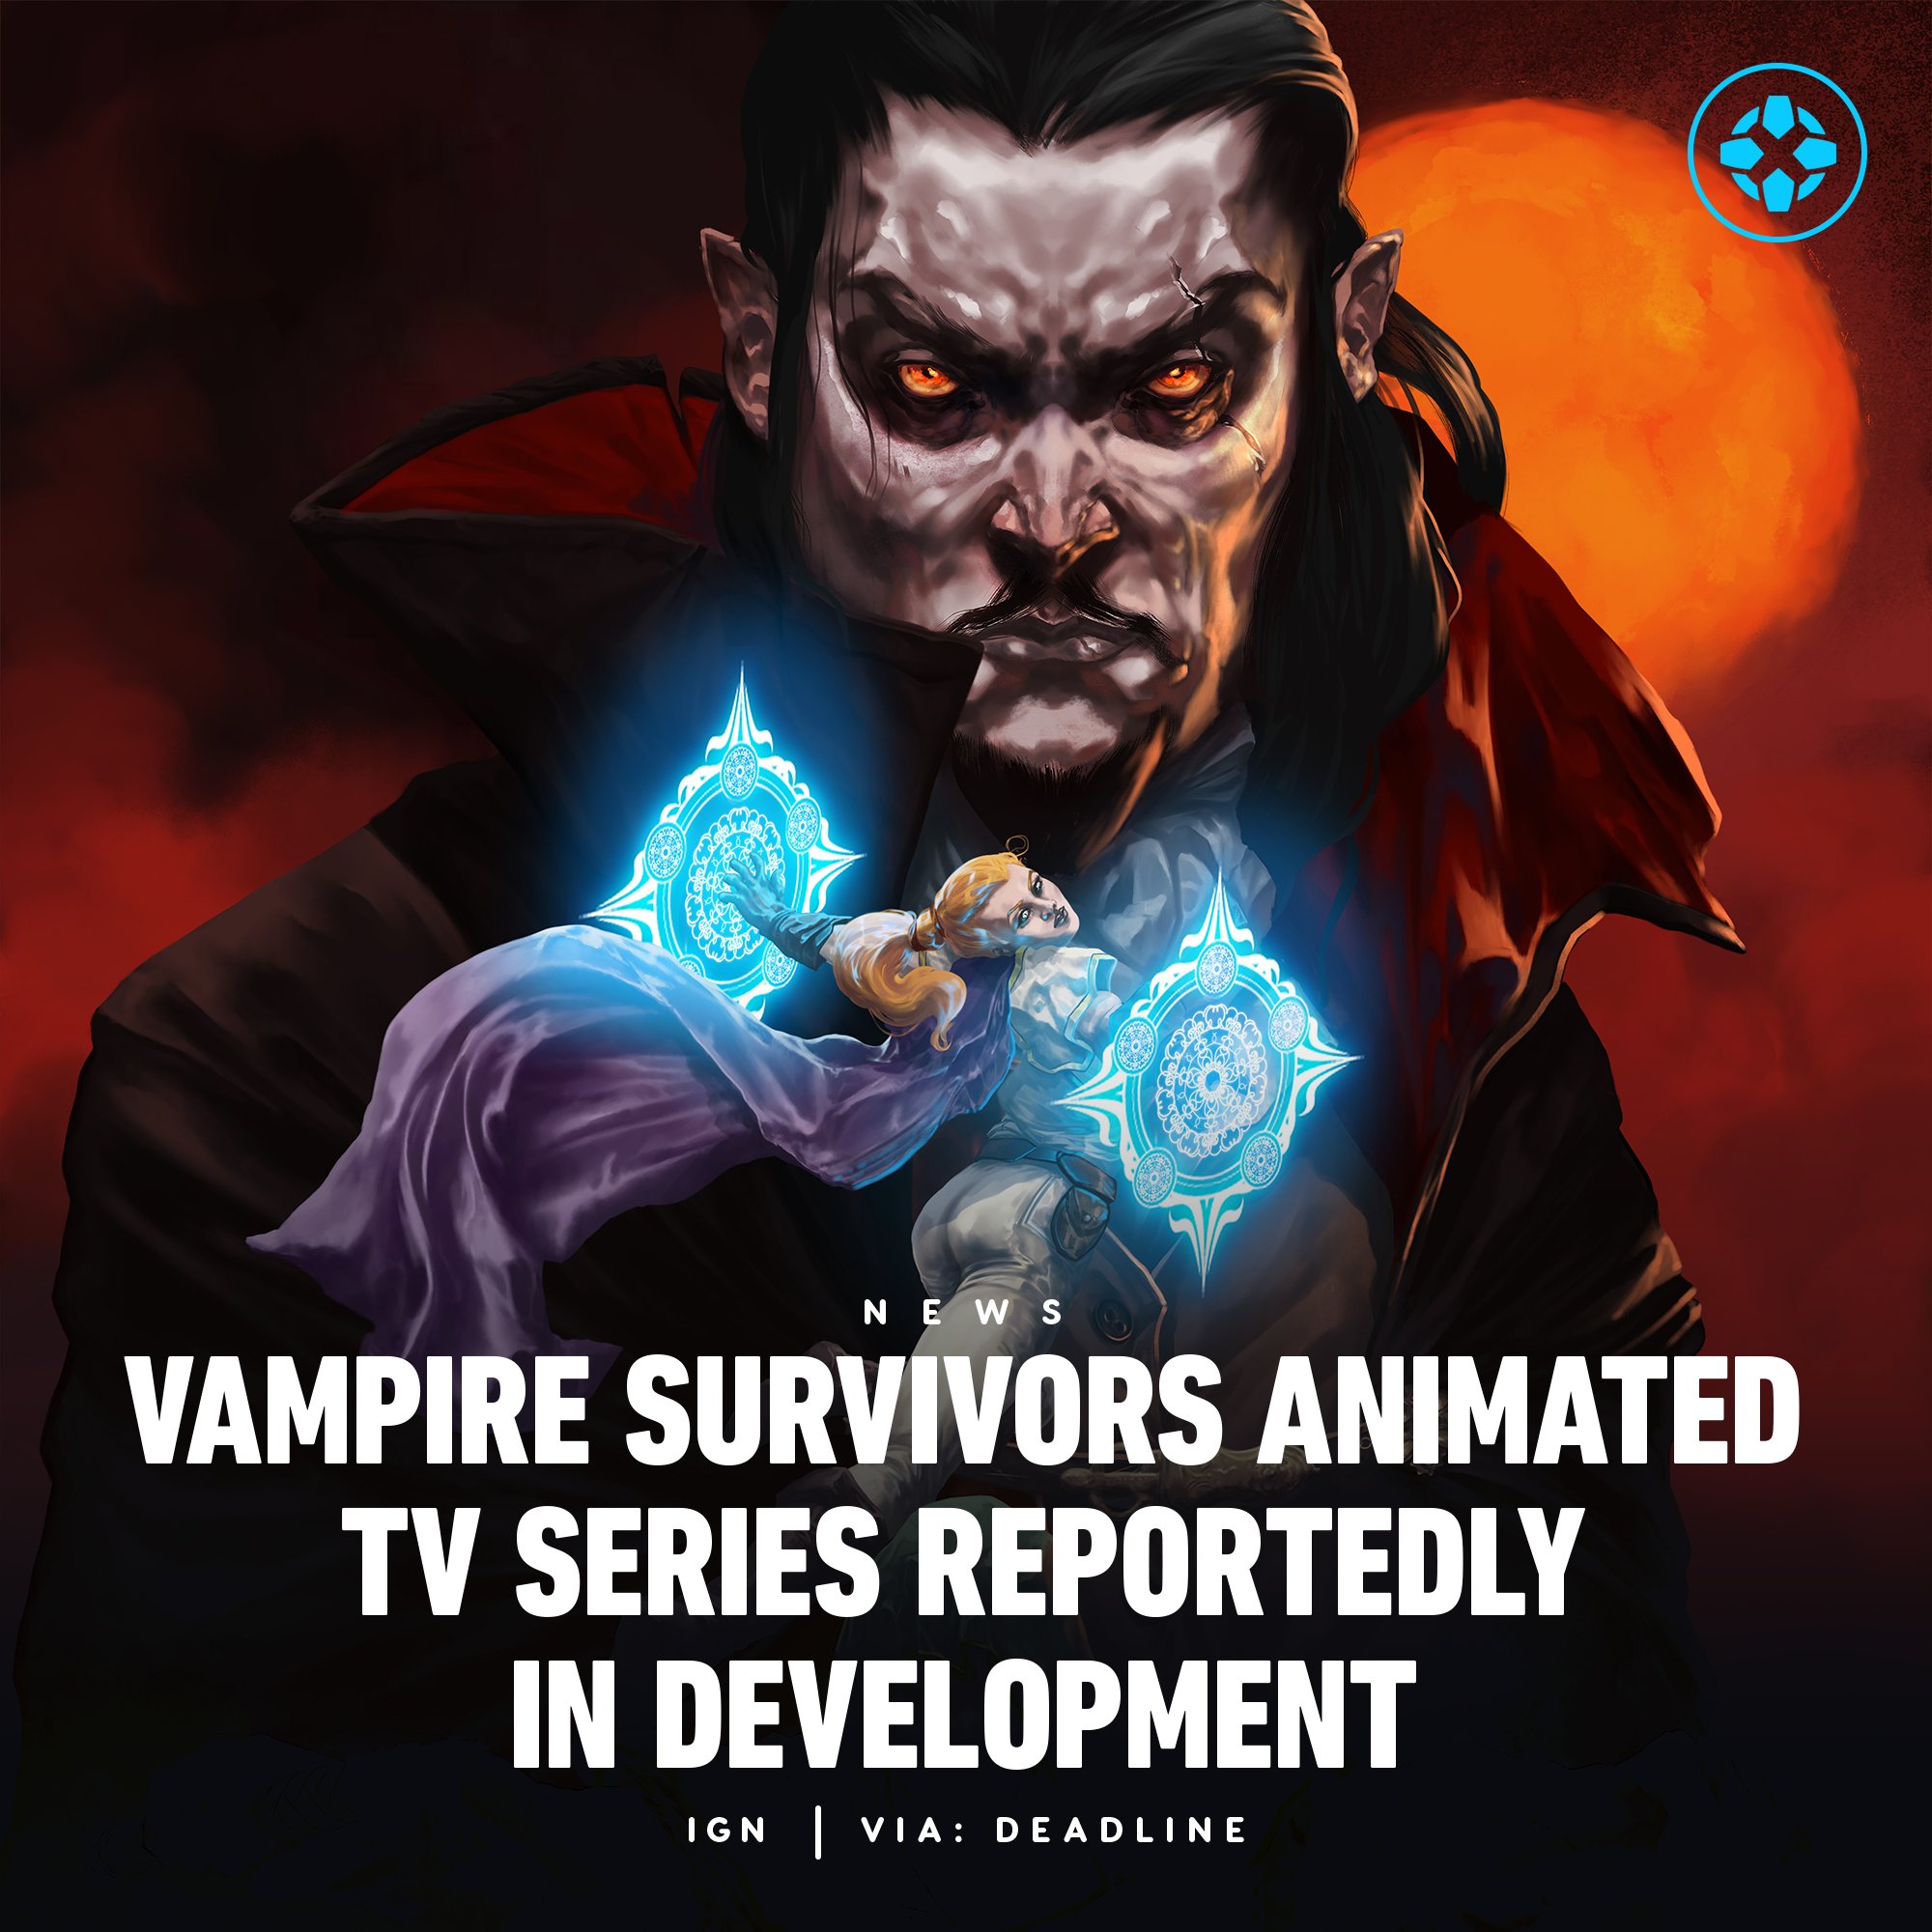 Vampire Survivors is being made into an animated series